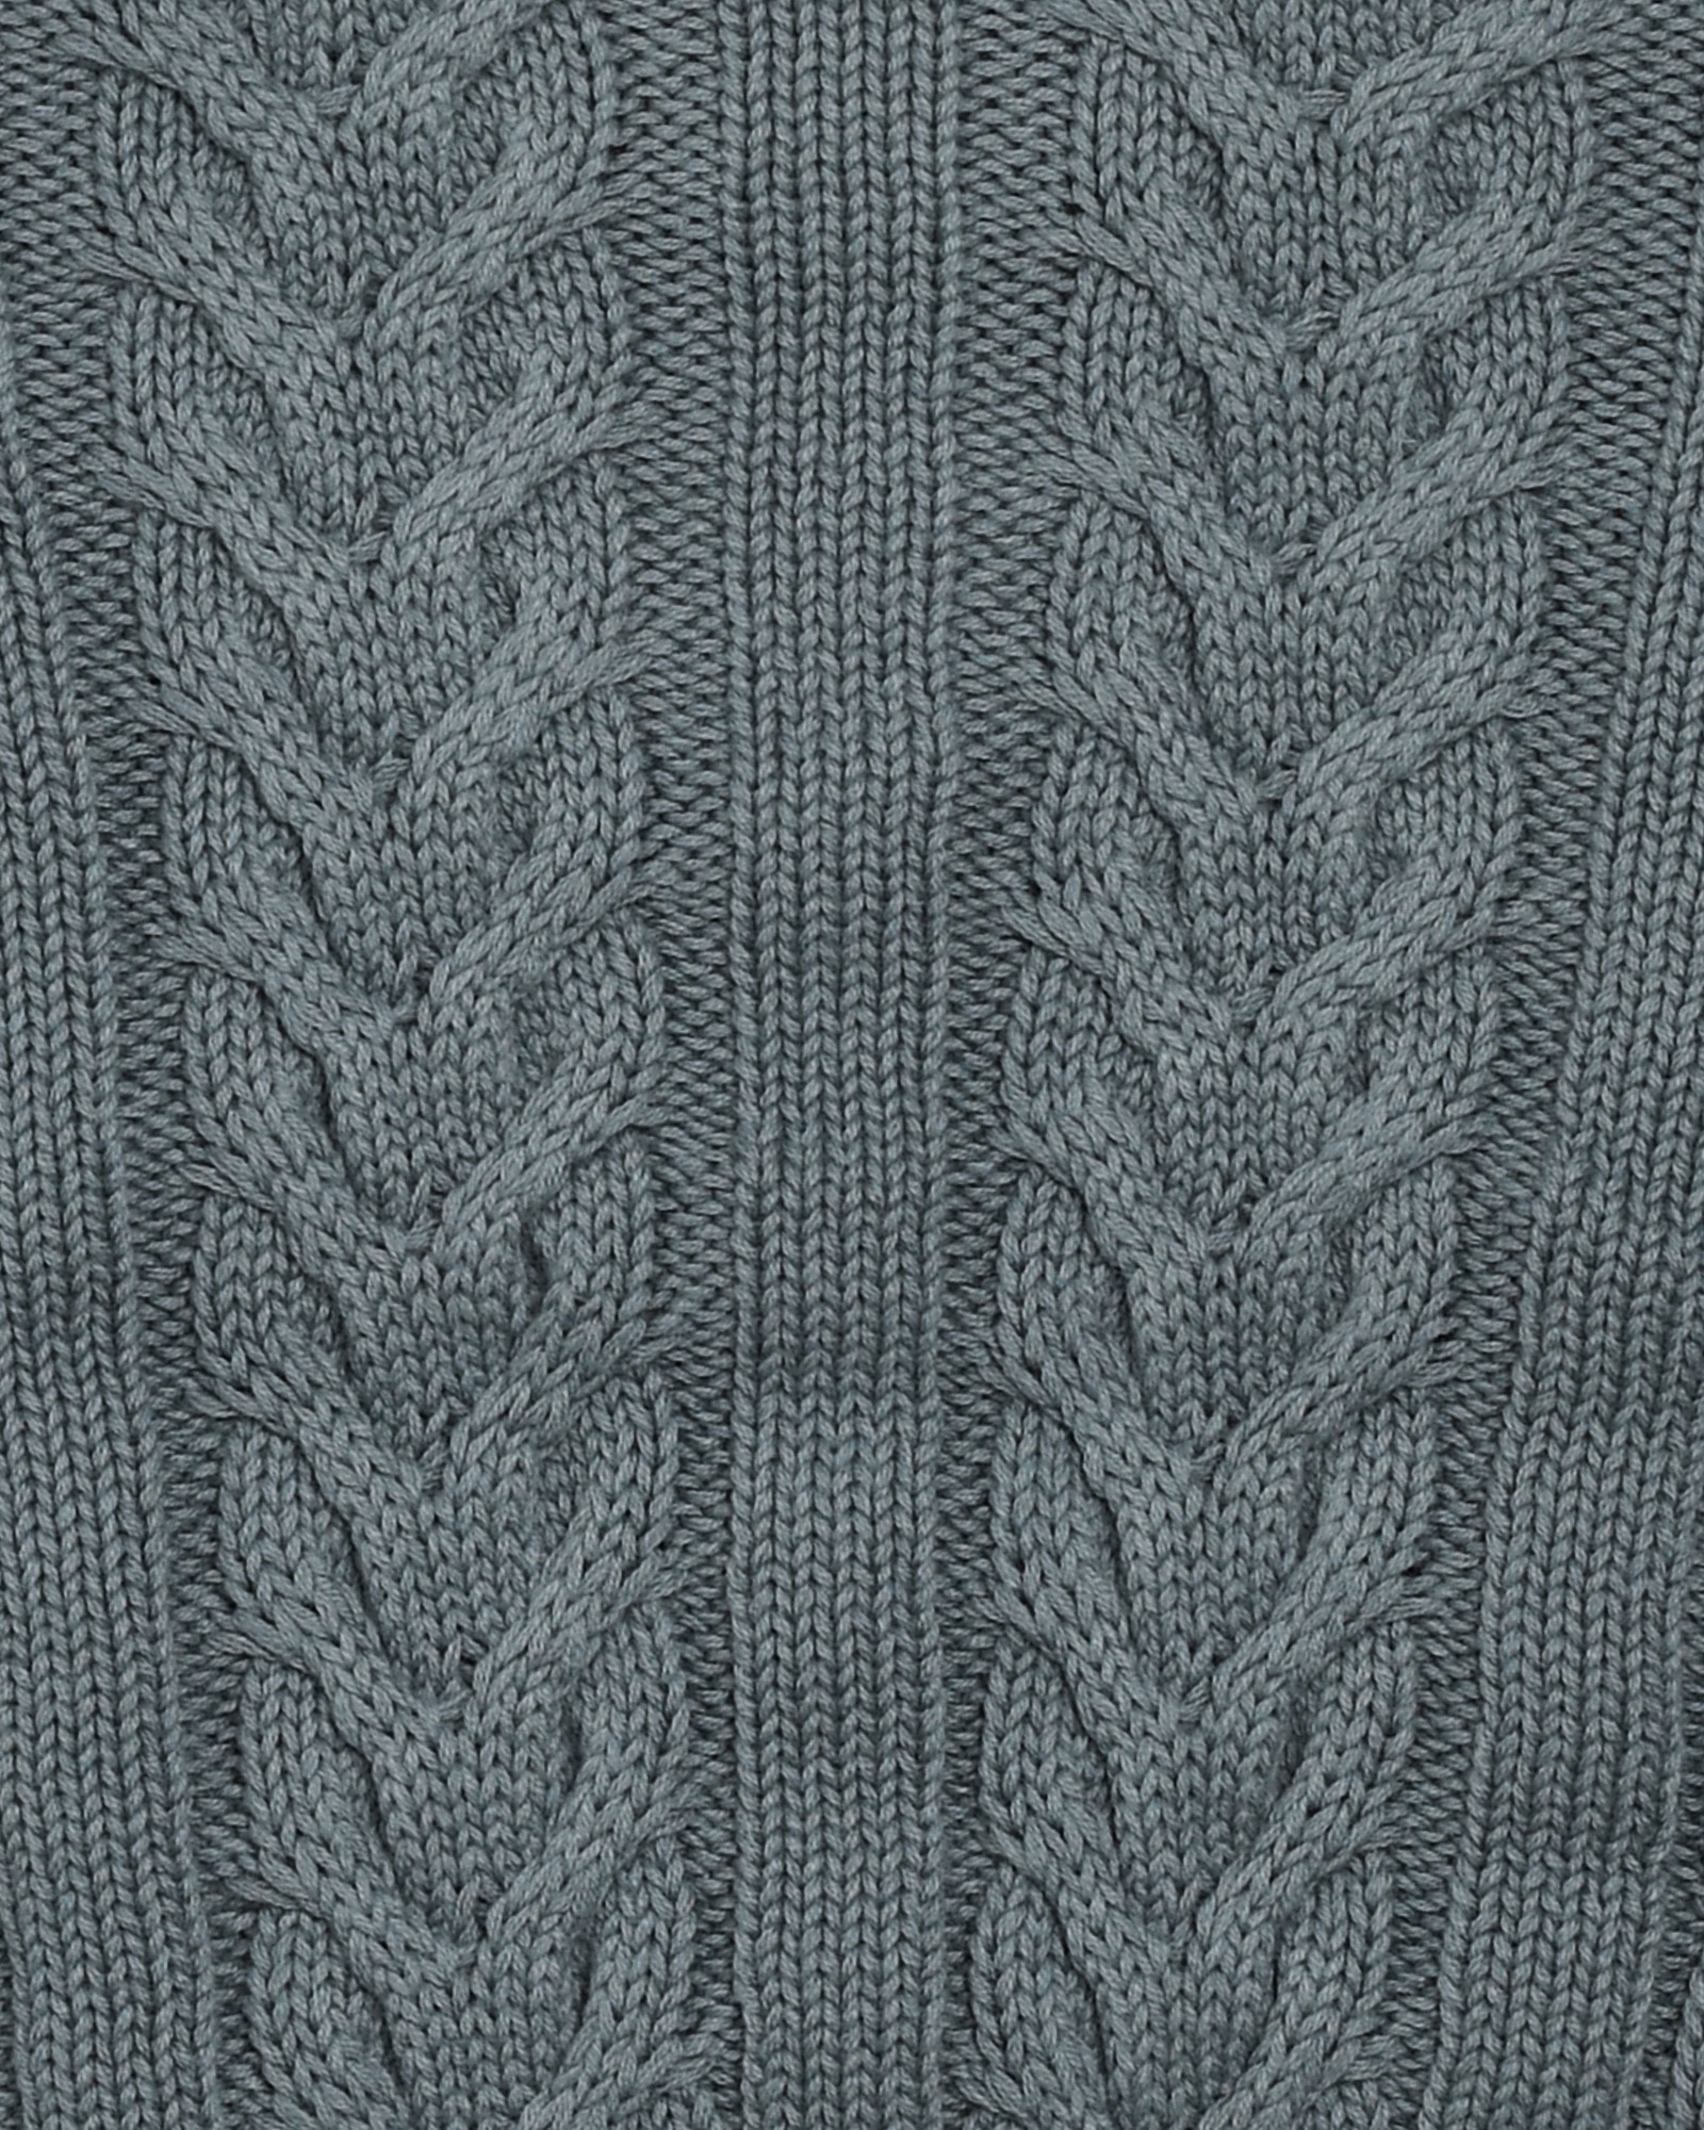 Cory Cable Cotton Knit in AGED BLUE